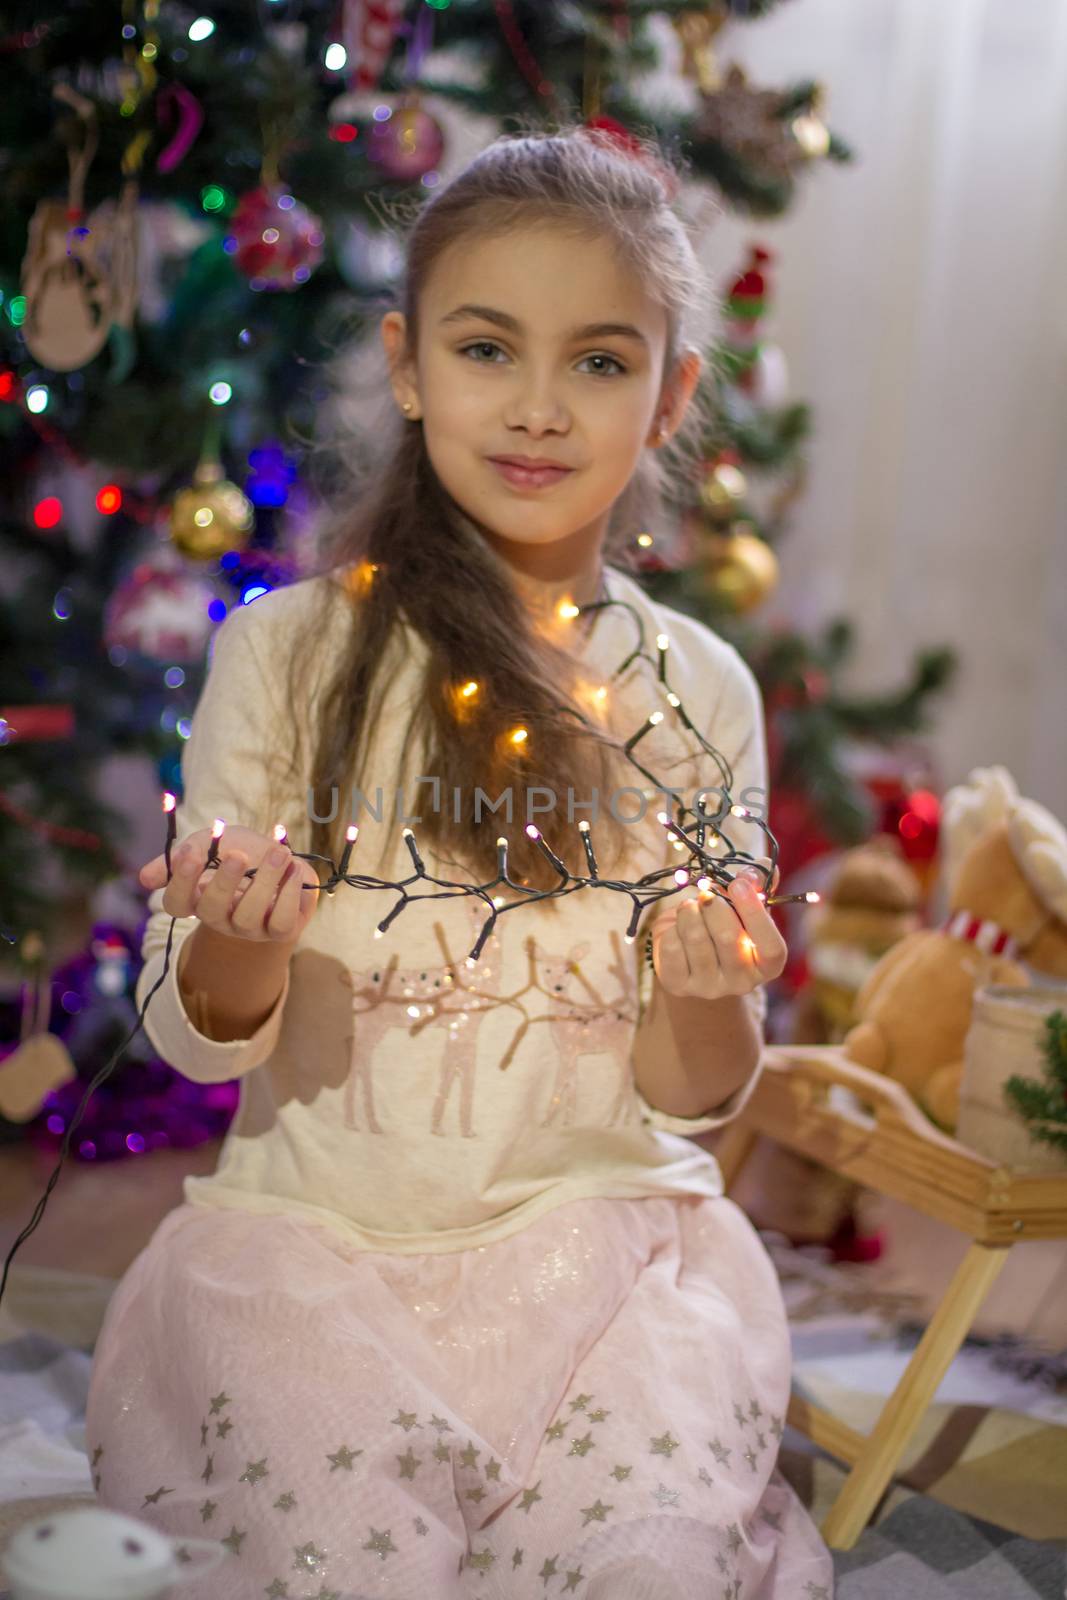 Girl holding lights over Christmas decoration by Angel_a